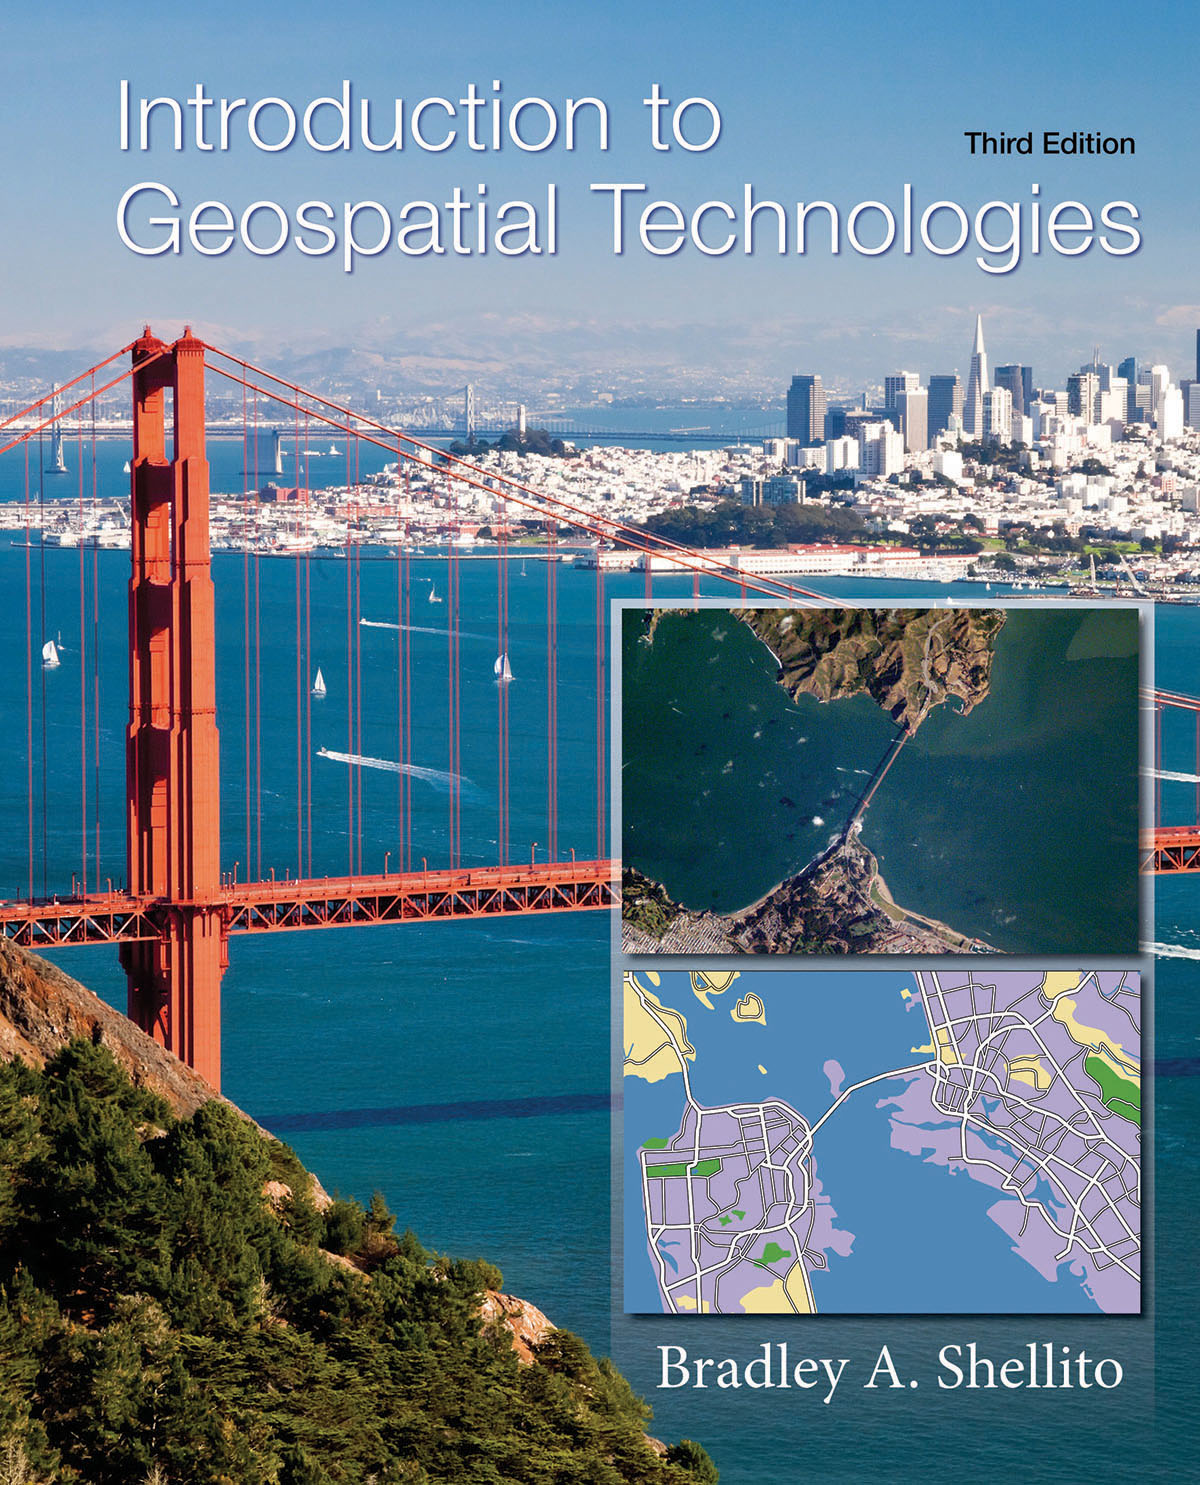 Introduction to Geospatial Technologies, Third edition, by Bradley Shellito, professor, Geography.